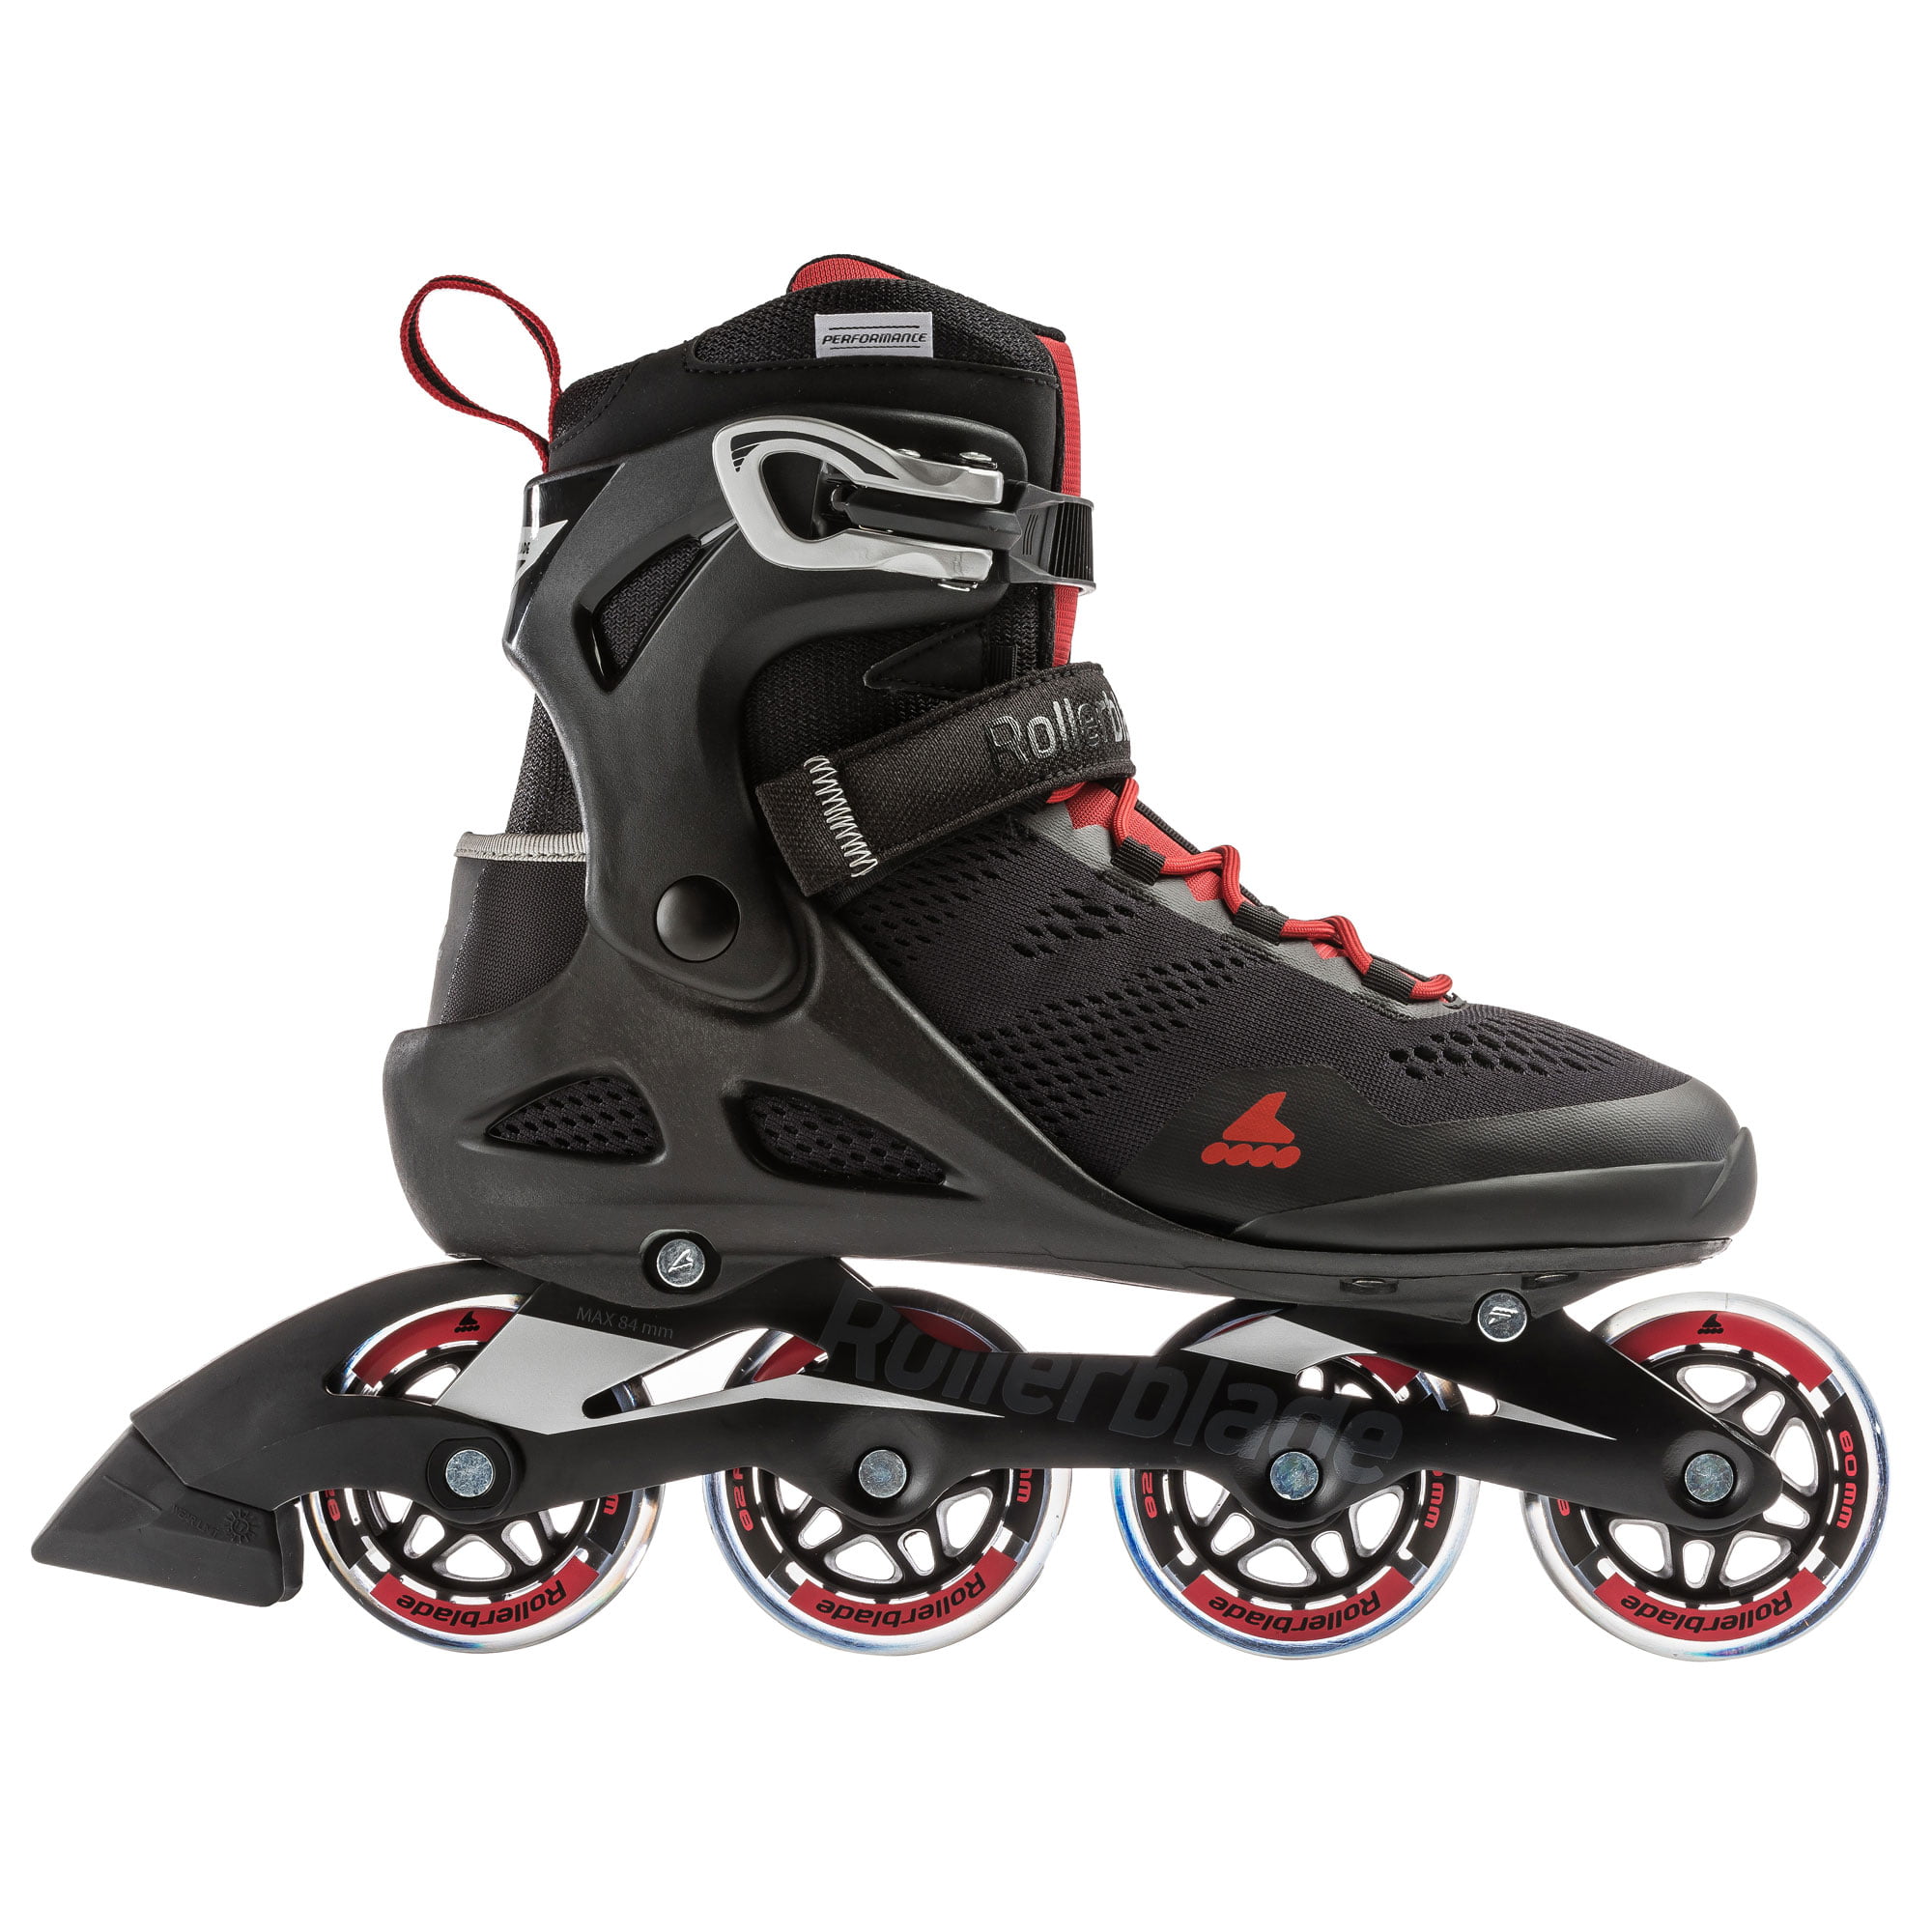 Rollerblade USA Macroblade 80 Womens Adult Fitness Inline Skate Size 7 Orange for sale online 